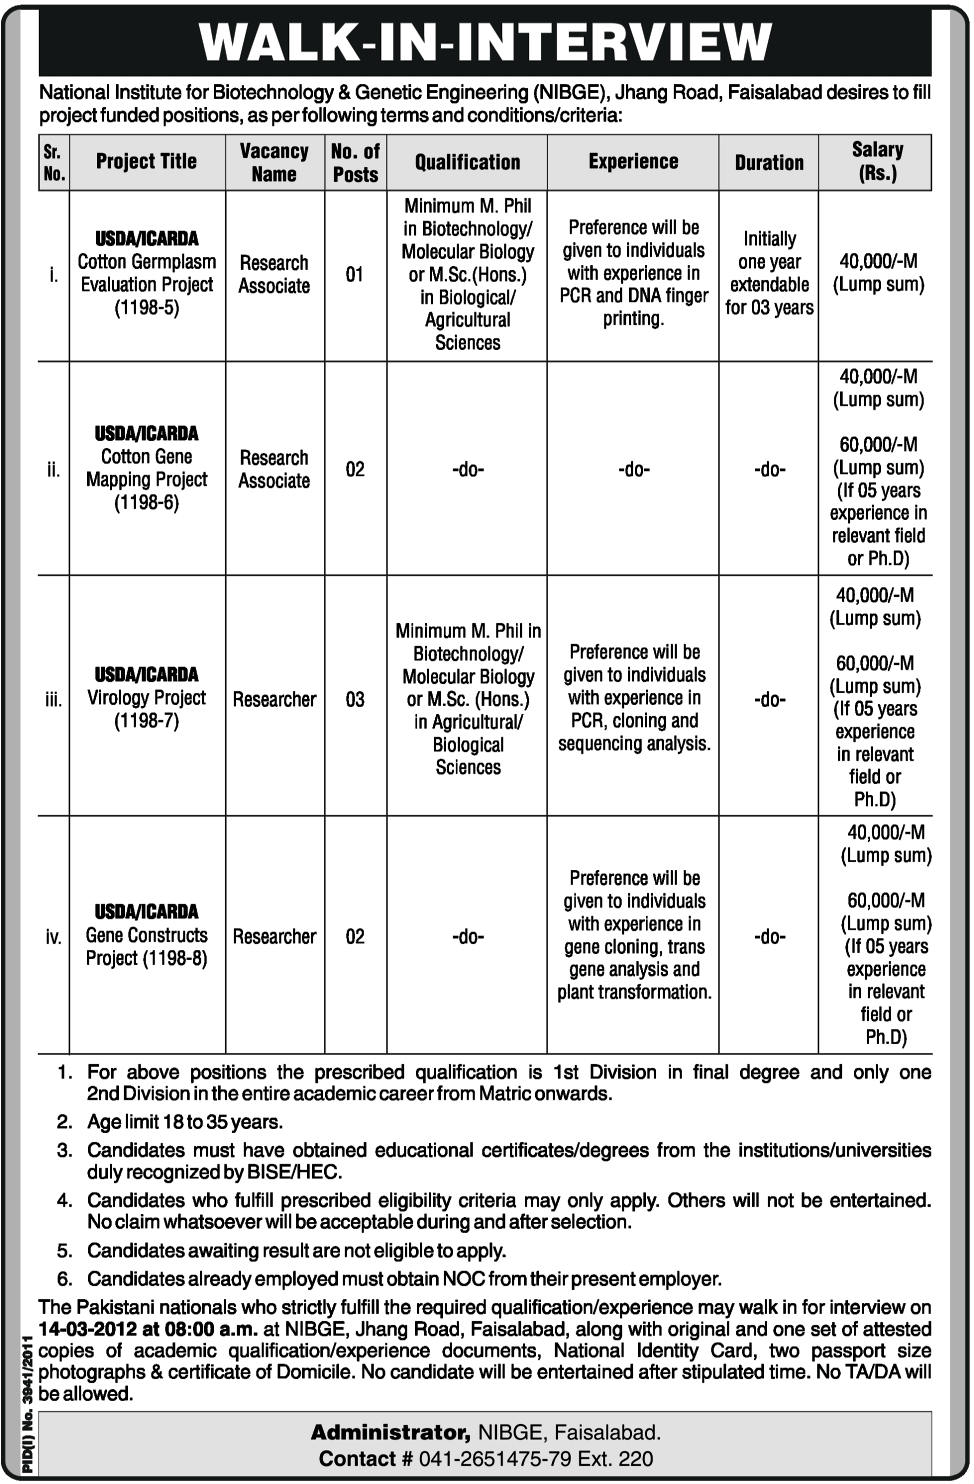 National Institute for Biotechnology & Genetic Engineering (NIBGE) Faisalabad Jobs Opportunity